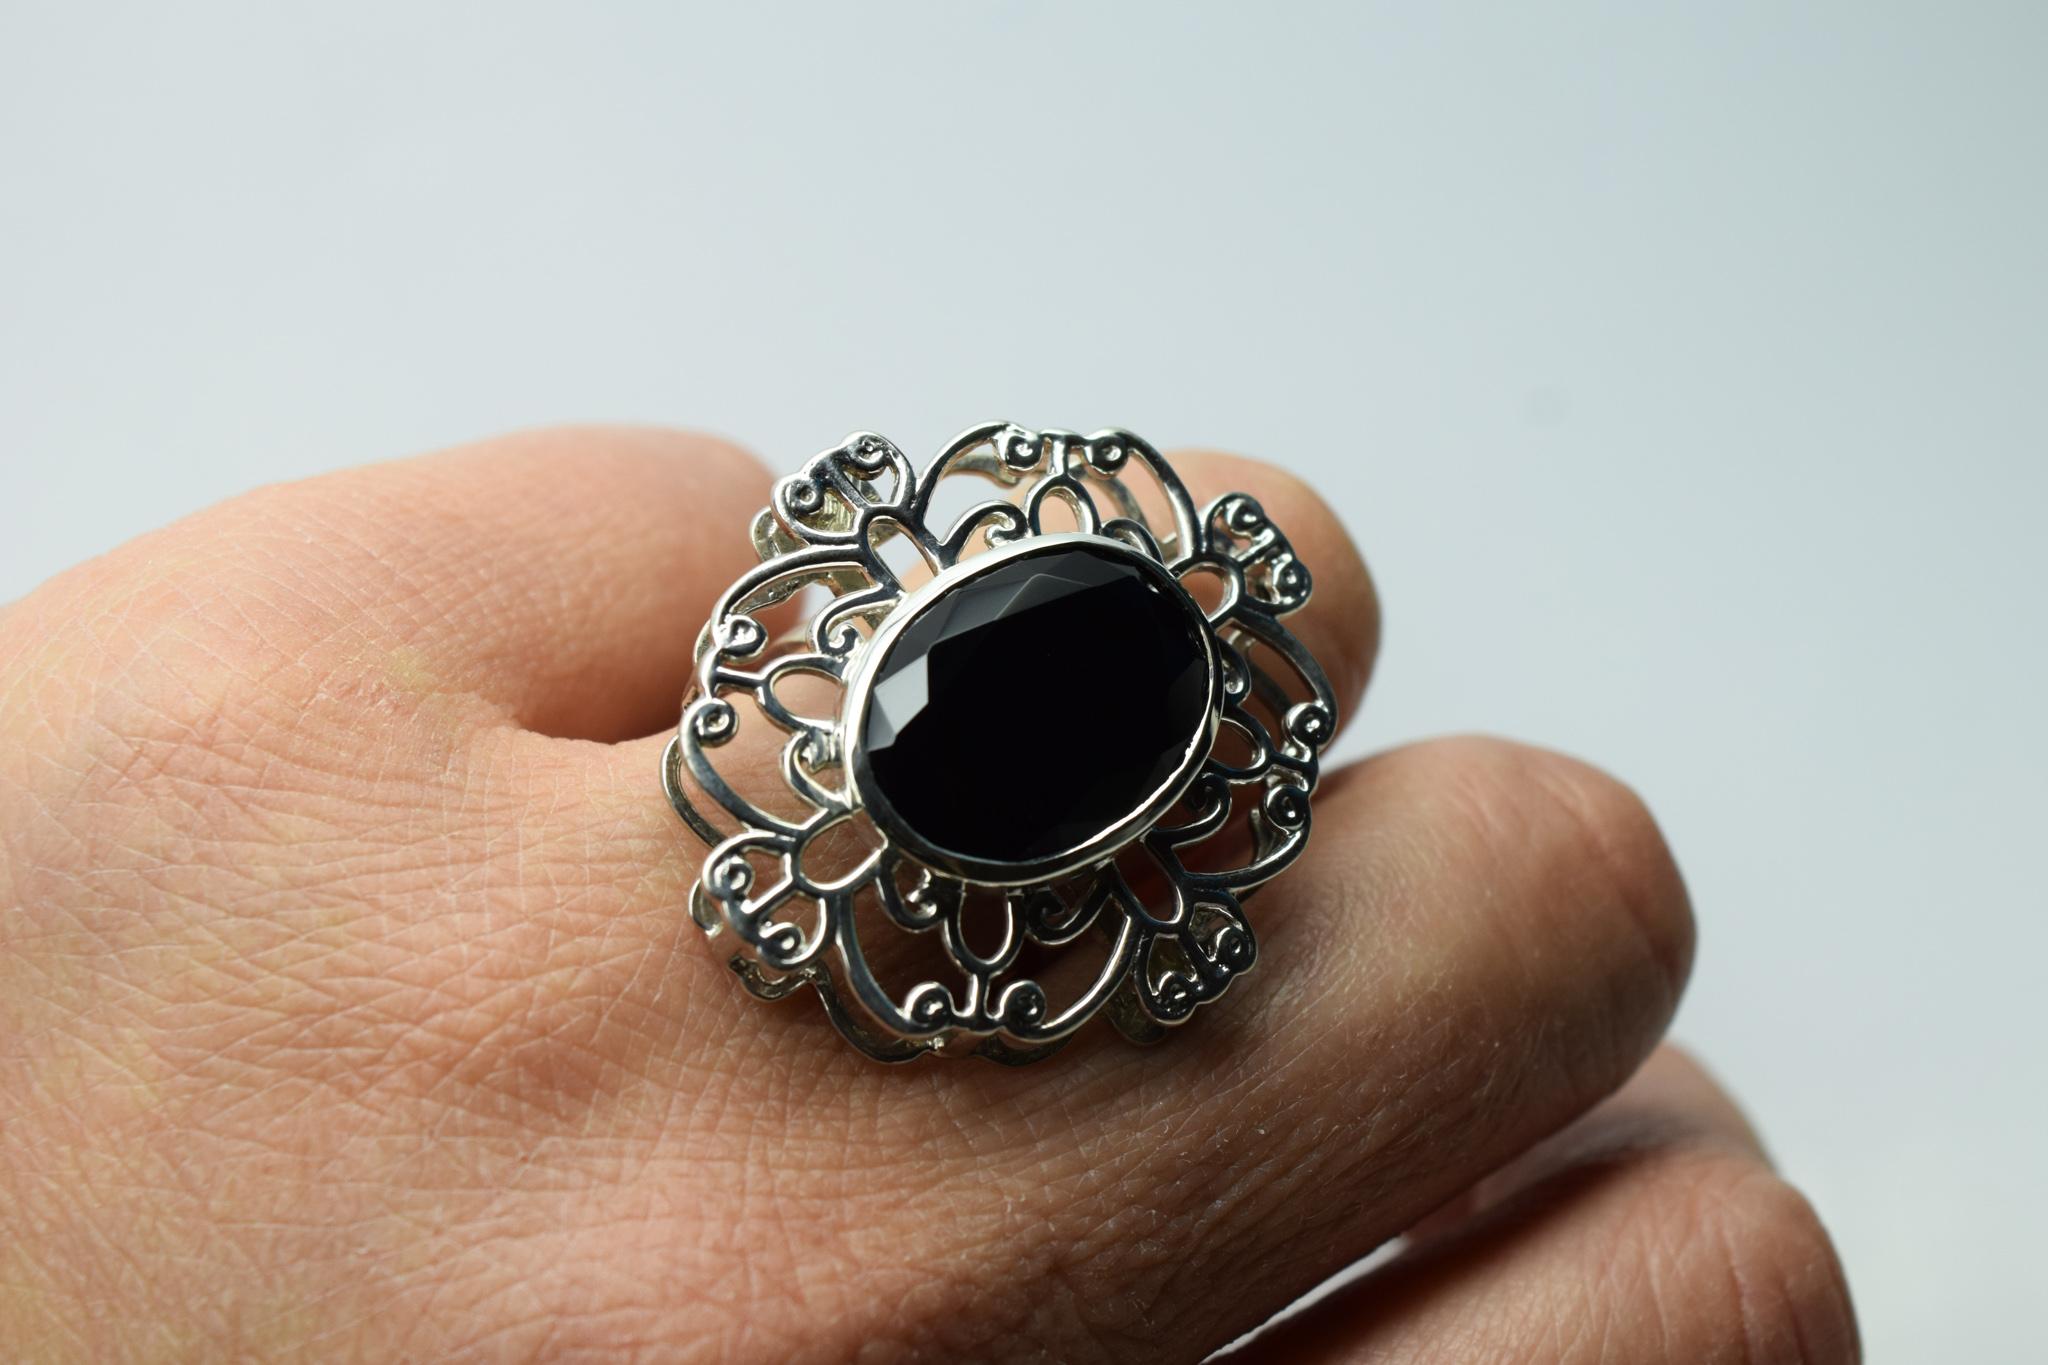 
Stunning Onyx ring in 14KT white gold, a cocktail ring like no other! This ring is size 7 but can be re-sized. The handling time to dispatch the ring is about 10 days.

Certificate of authenticity comes with purchase!

ABOUT US
We are a